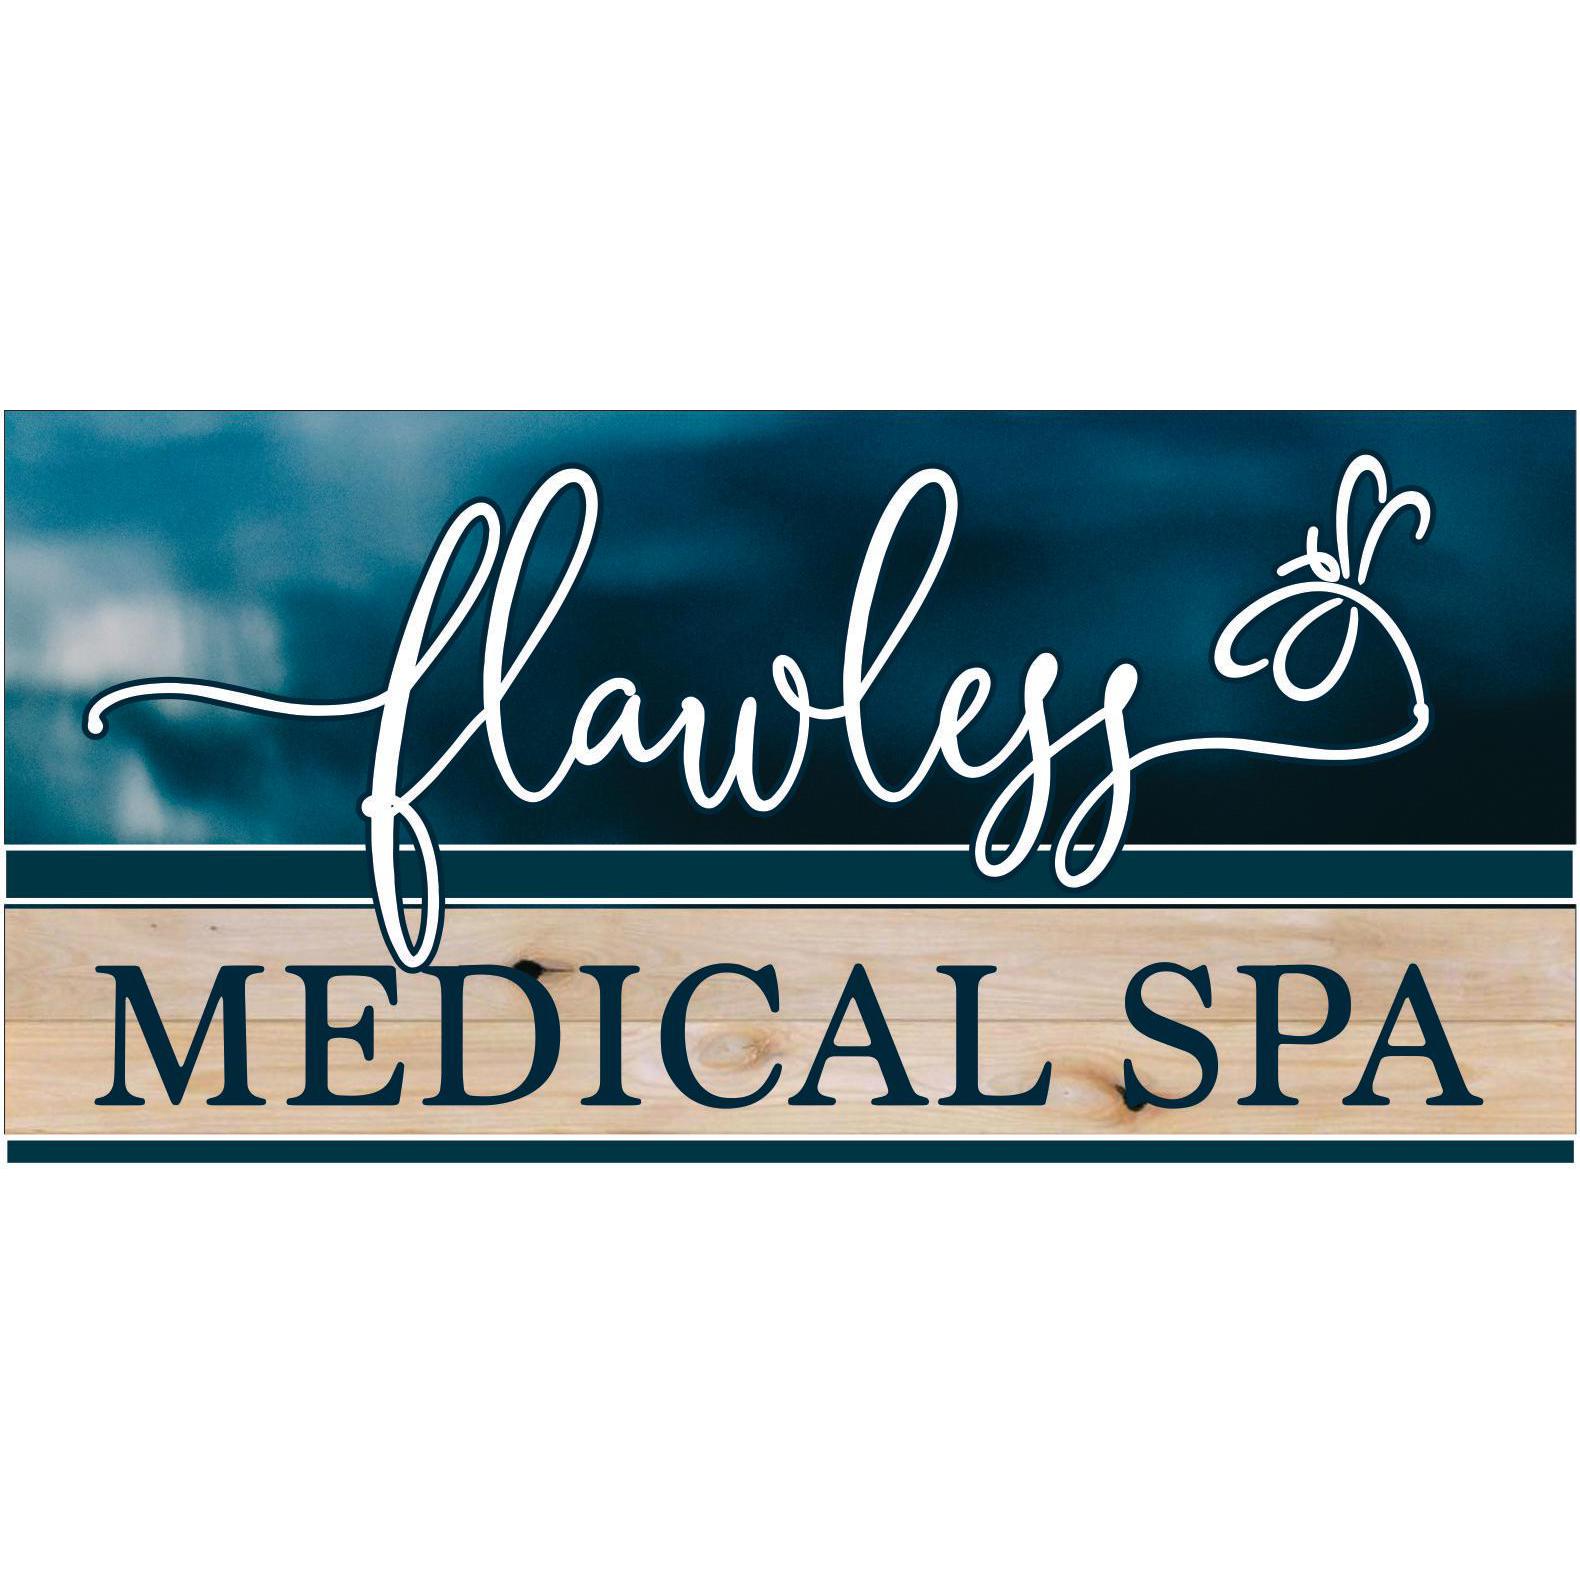 flawless med spa